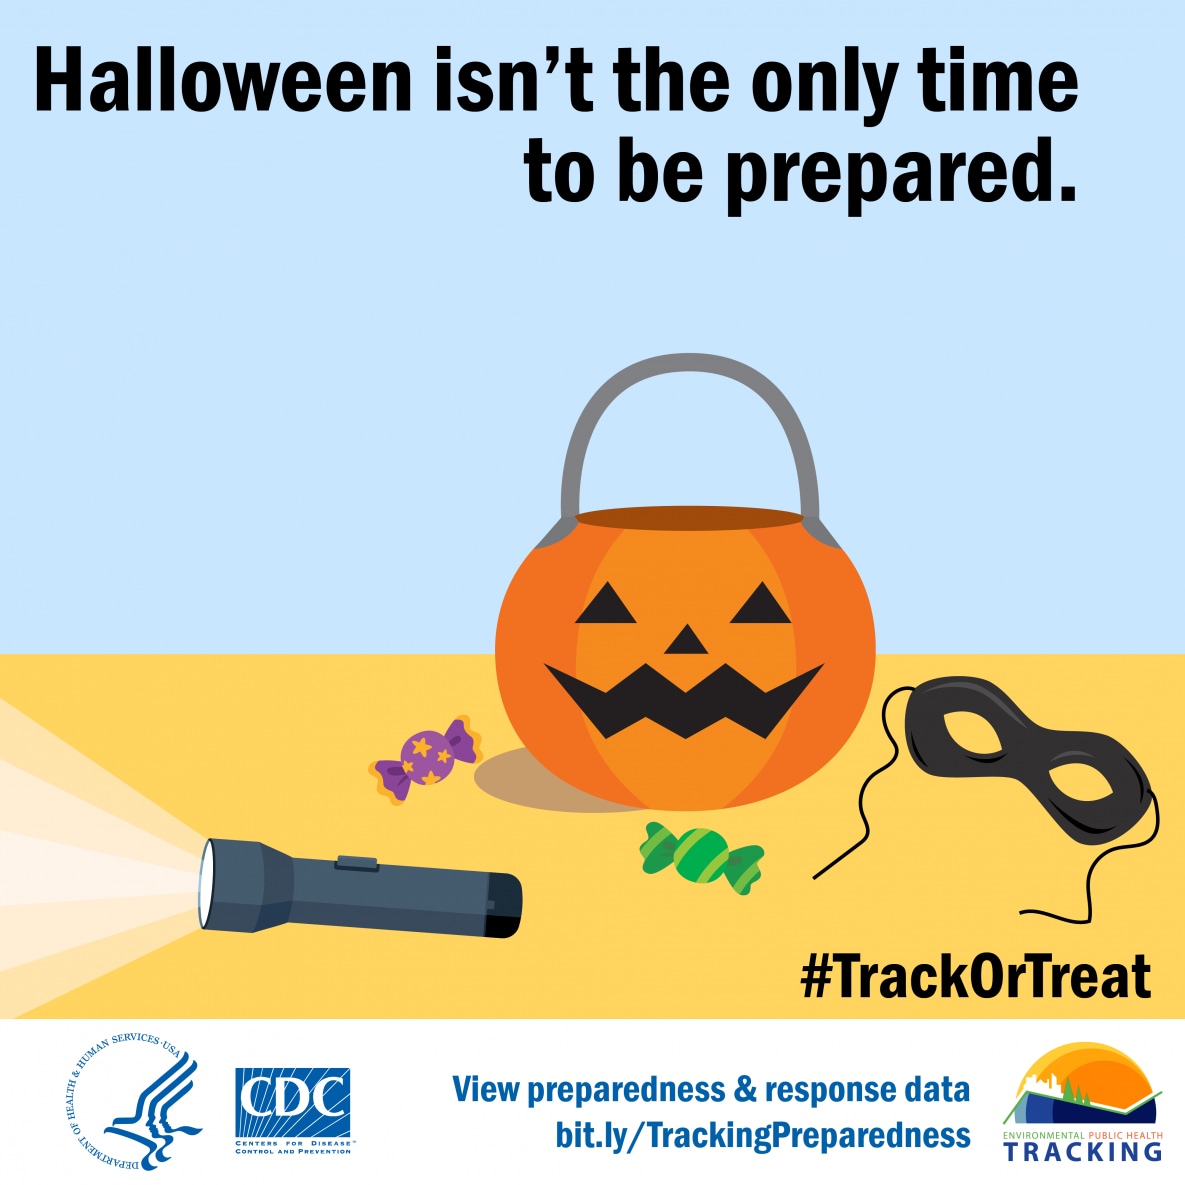 Jack-o-lantern bucket, flashlight, mask, and candy graphics with text: "Halloween isn’t the only time to be prepared."